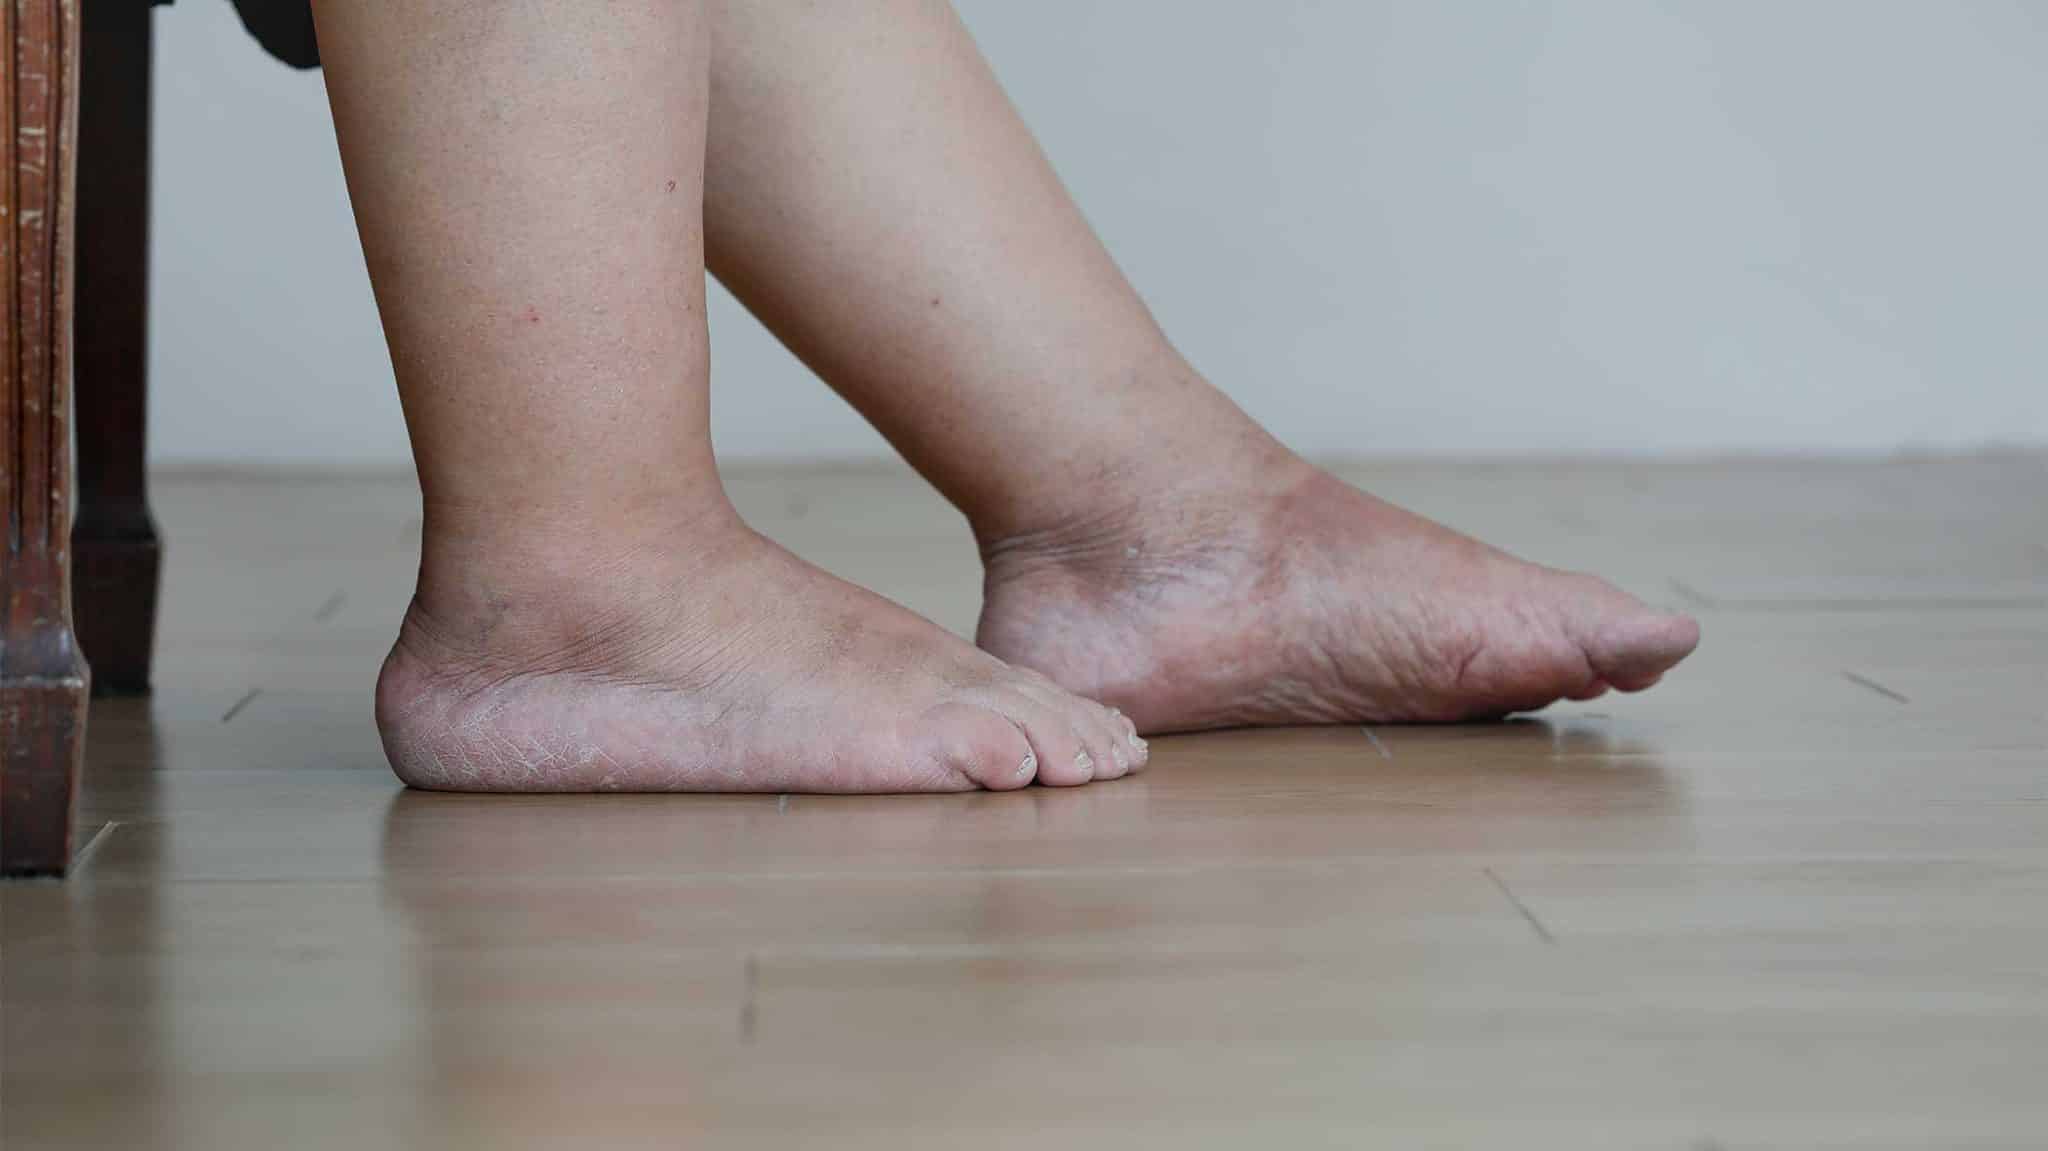 Why Does My Feet Swell After Drinking Alcohol?